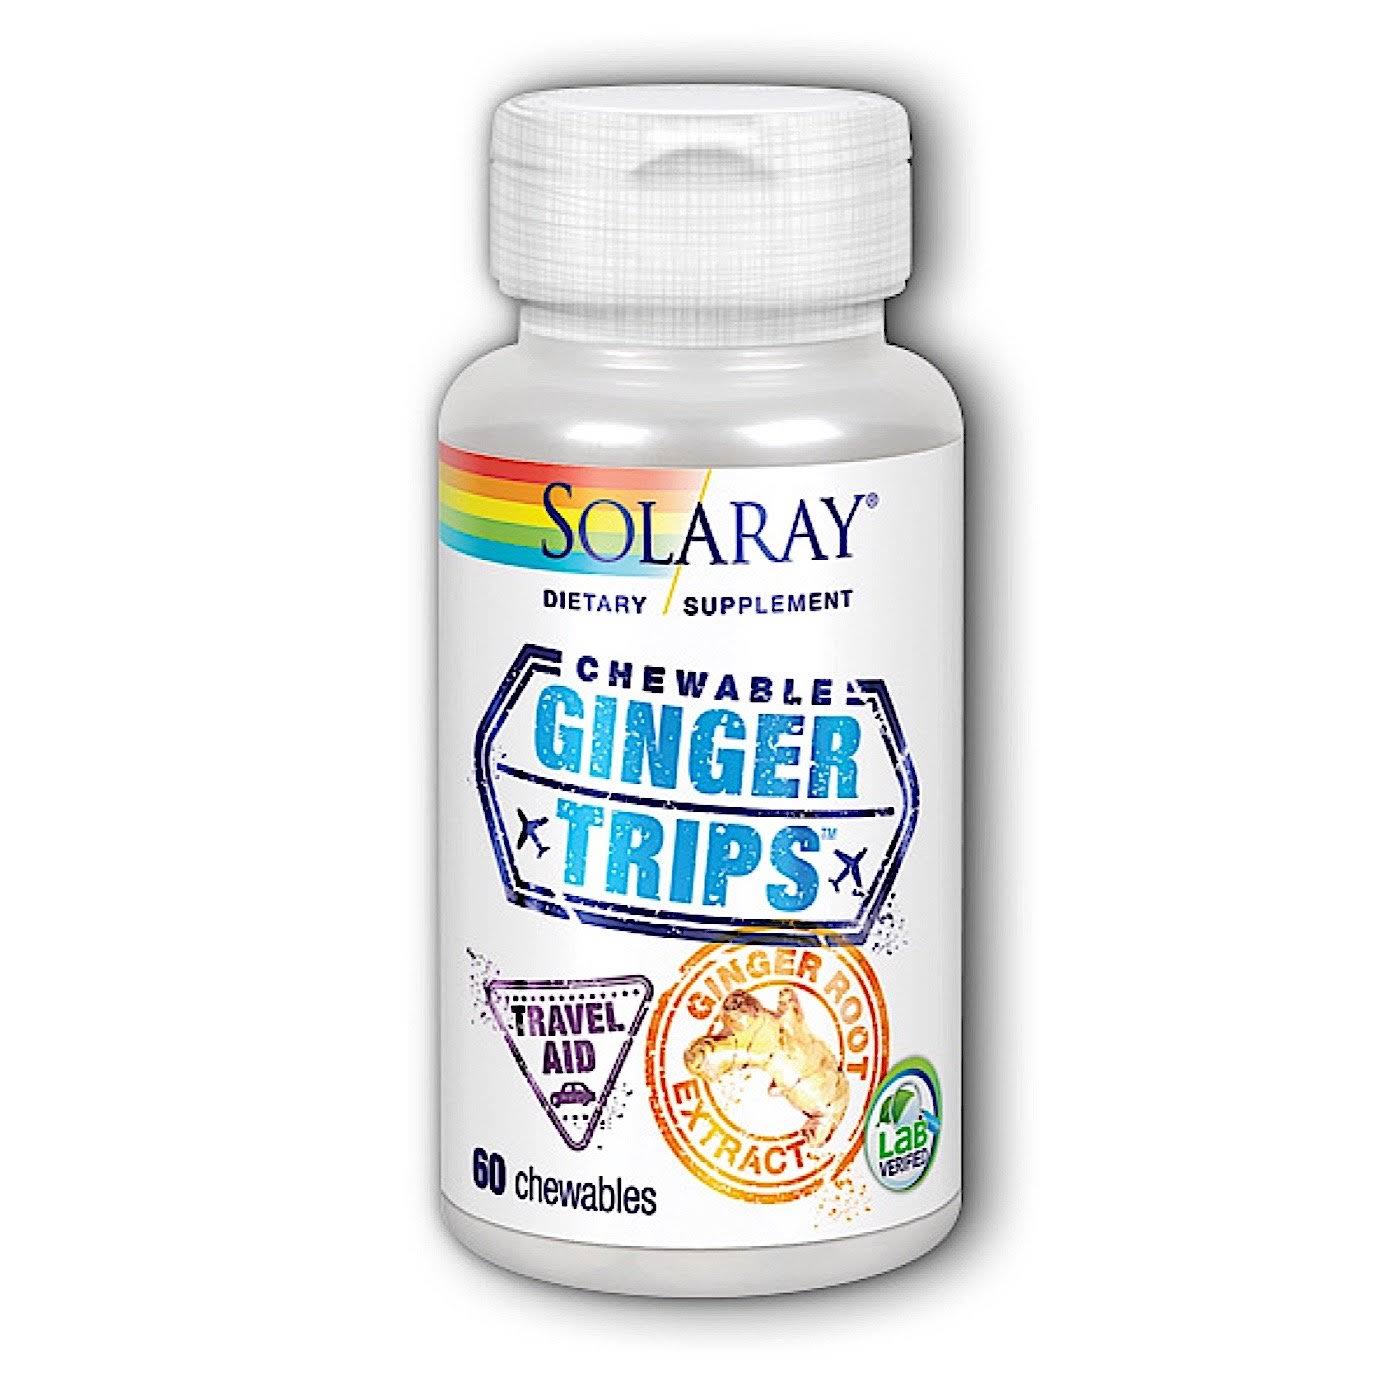 Solaray Ginger Trips Chewable Wafers